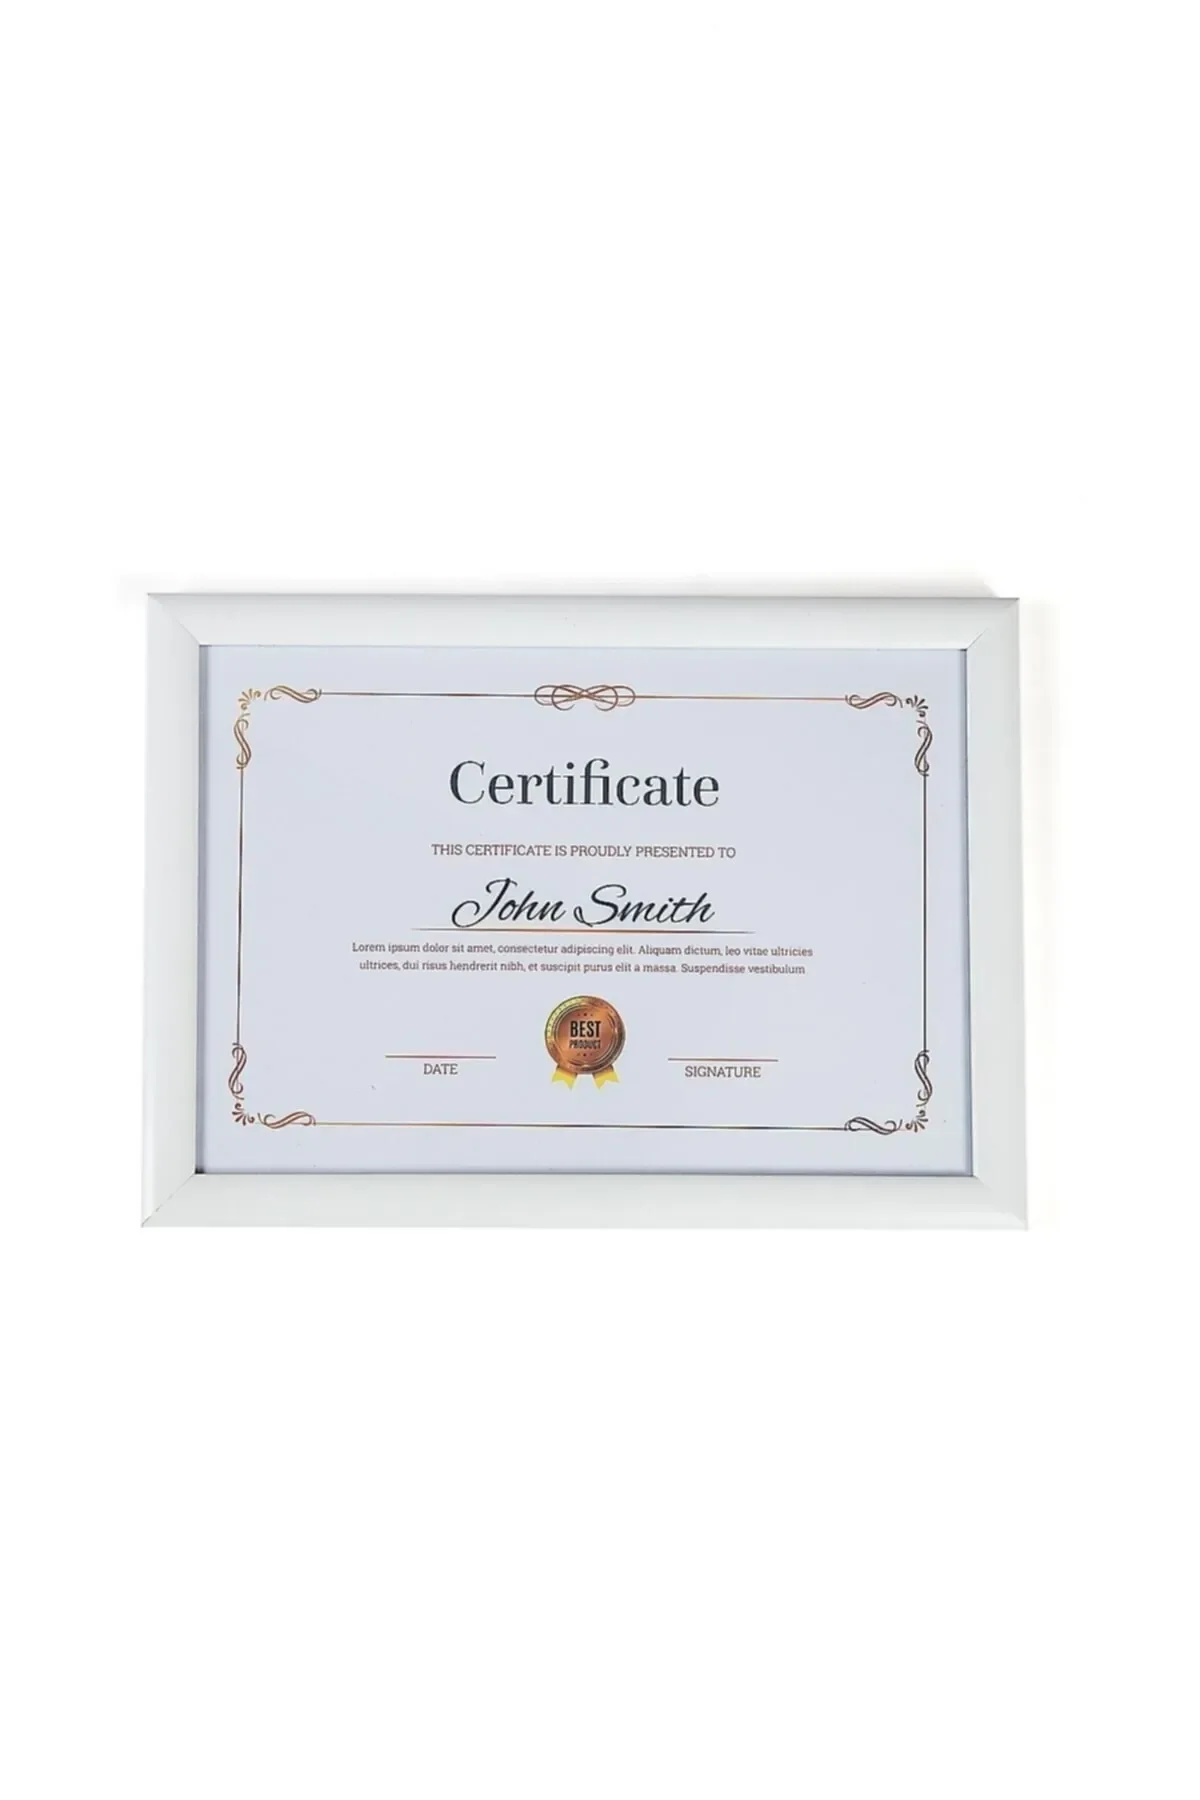 

A4 Frame White Unbreakable Pvc Glass 21x30 For Certificate Diploma Document Photo, Wooden Photo Frame Picture Frames Wall